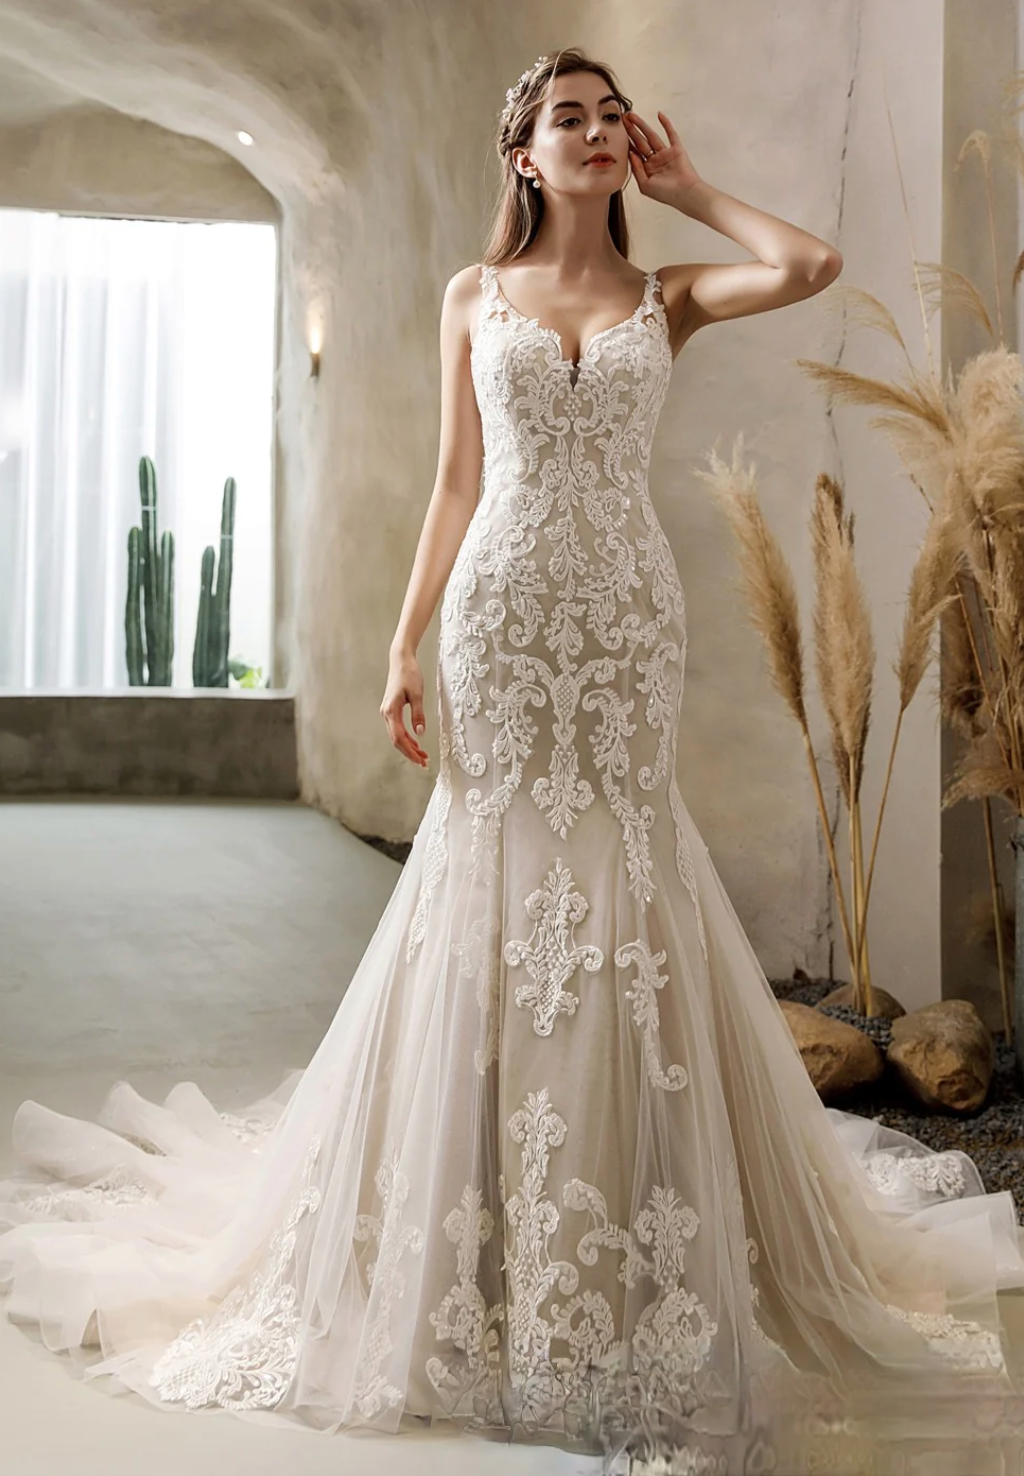 Halter Neckline Lace Bridal Gown With Crisscross Back – TulleLux Bridal  Crowns & Accessories